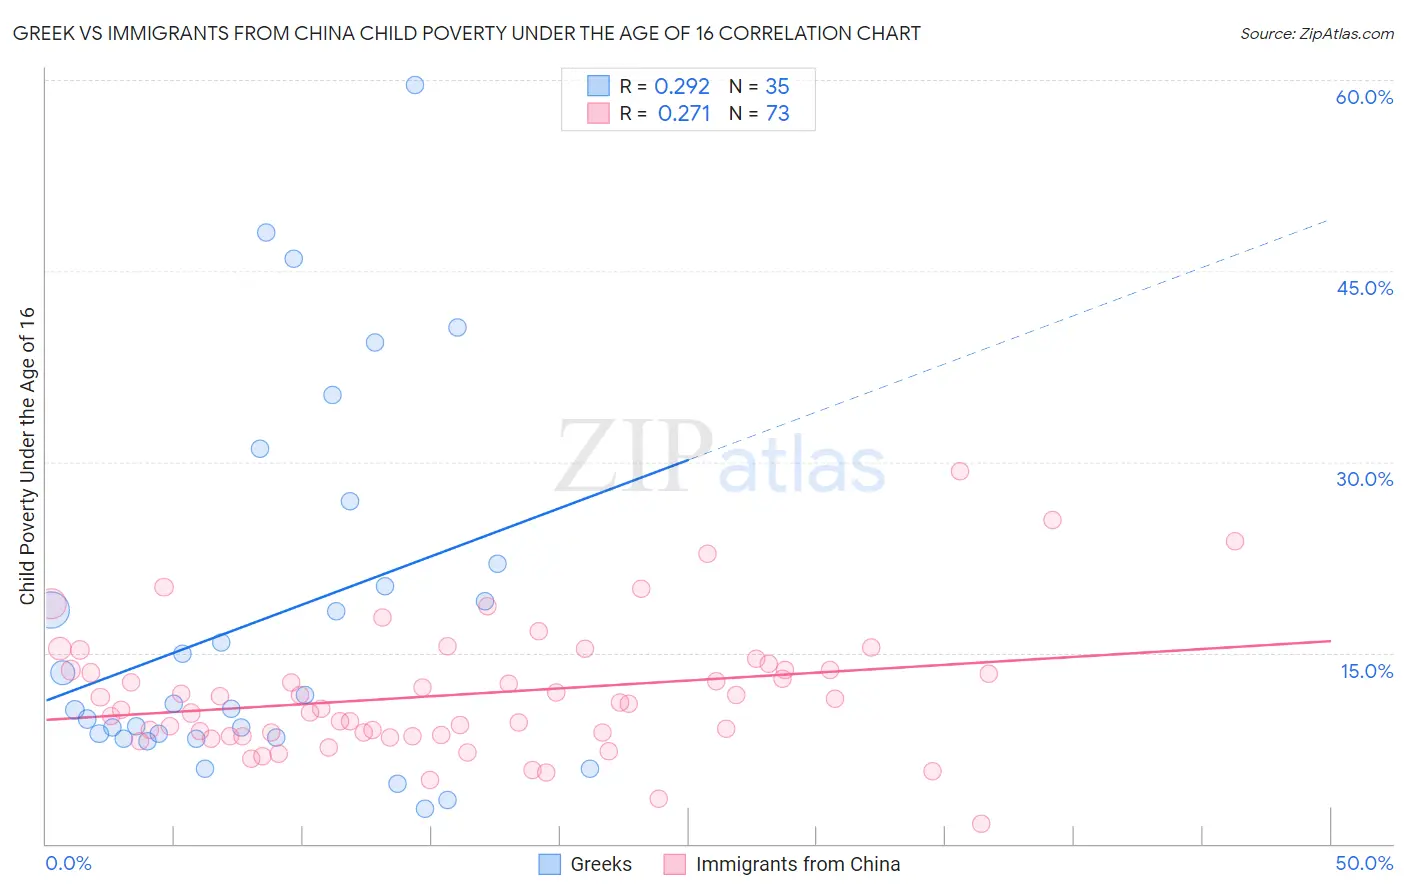 Greek vs Immigrants from China Child Poverty Under the Age of 16